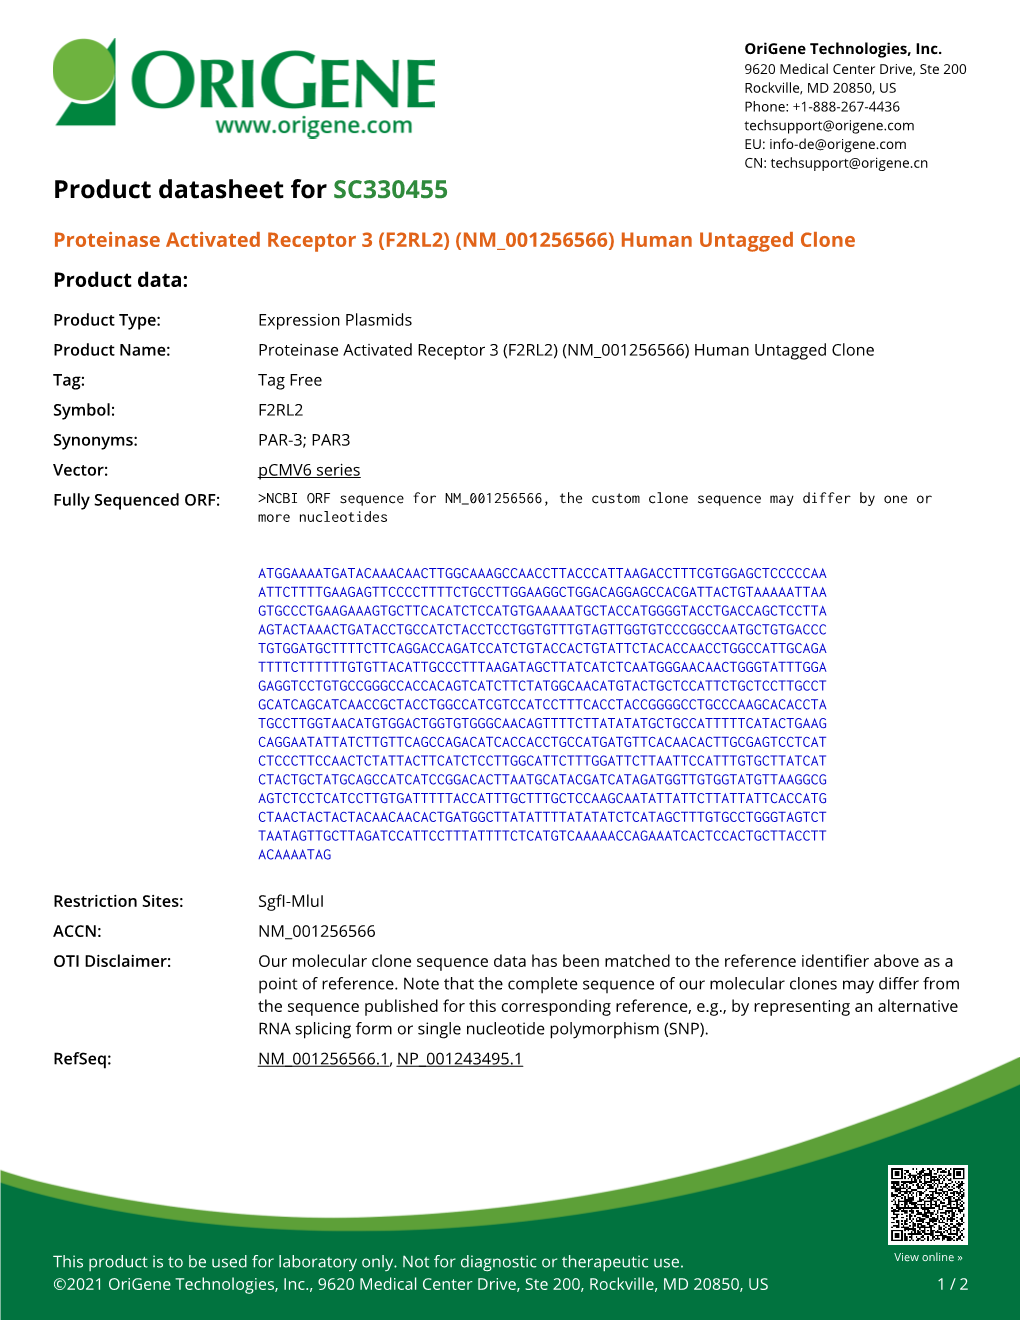 Proteinase Activated Receptor 3 (F2RL2) (NM 001256566) Human Untagged Clone Product Data